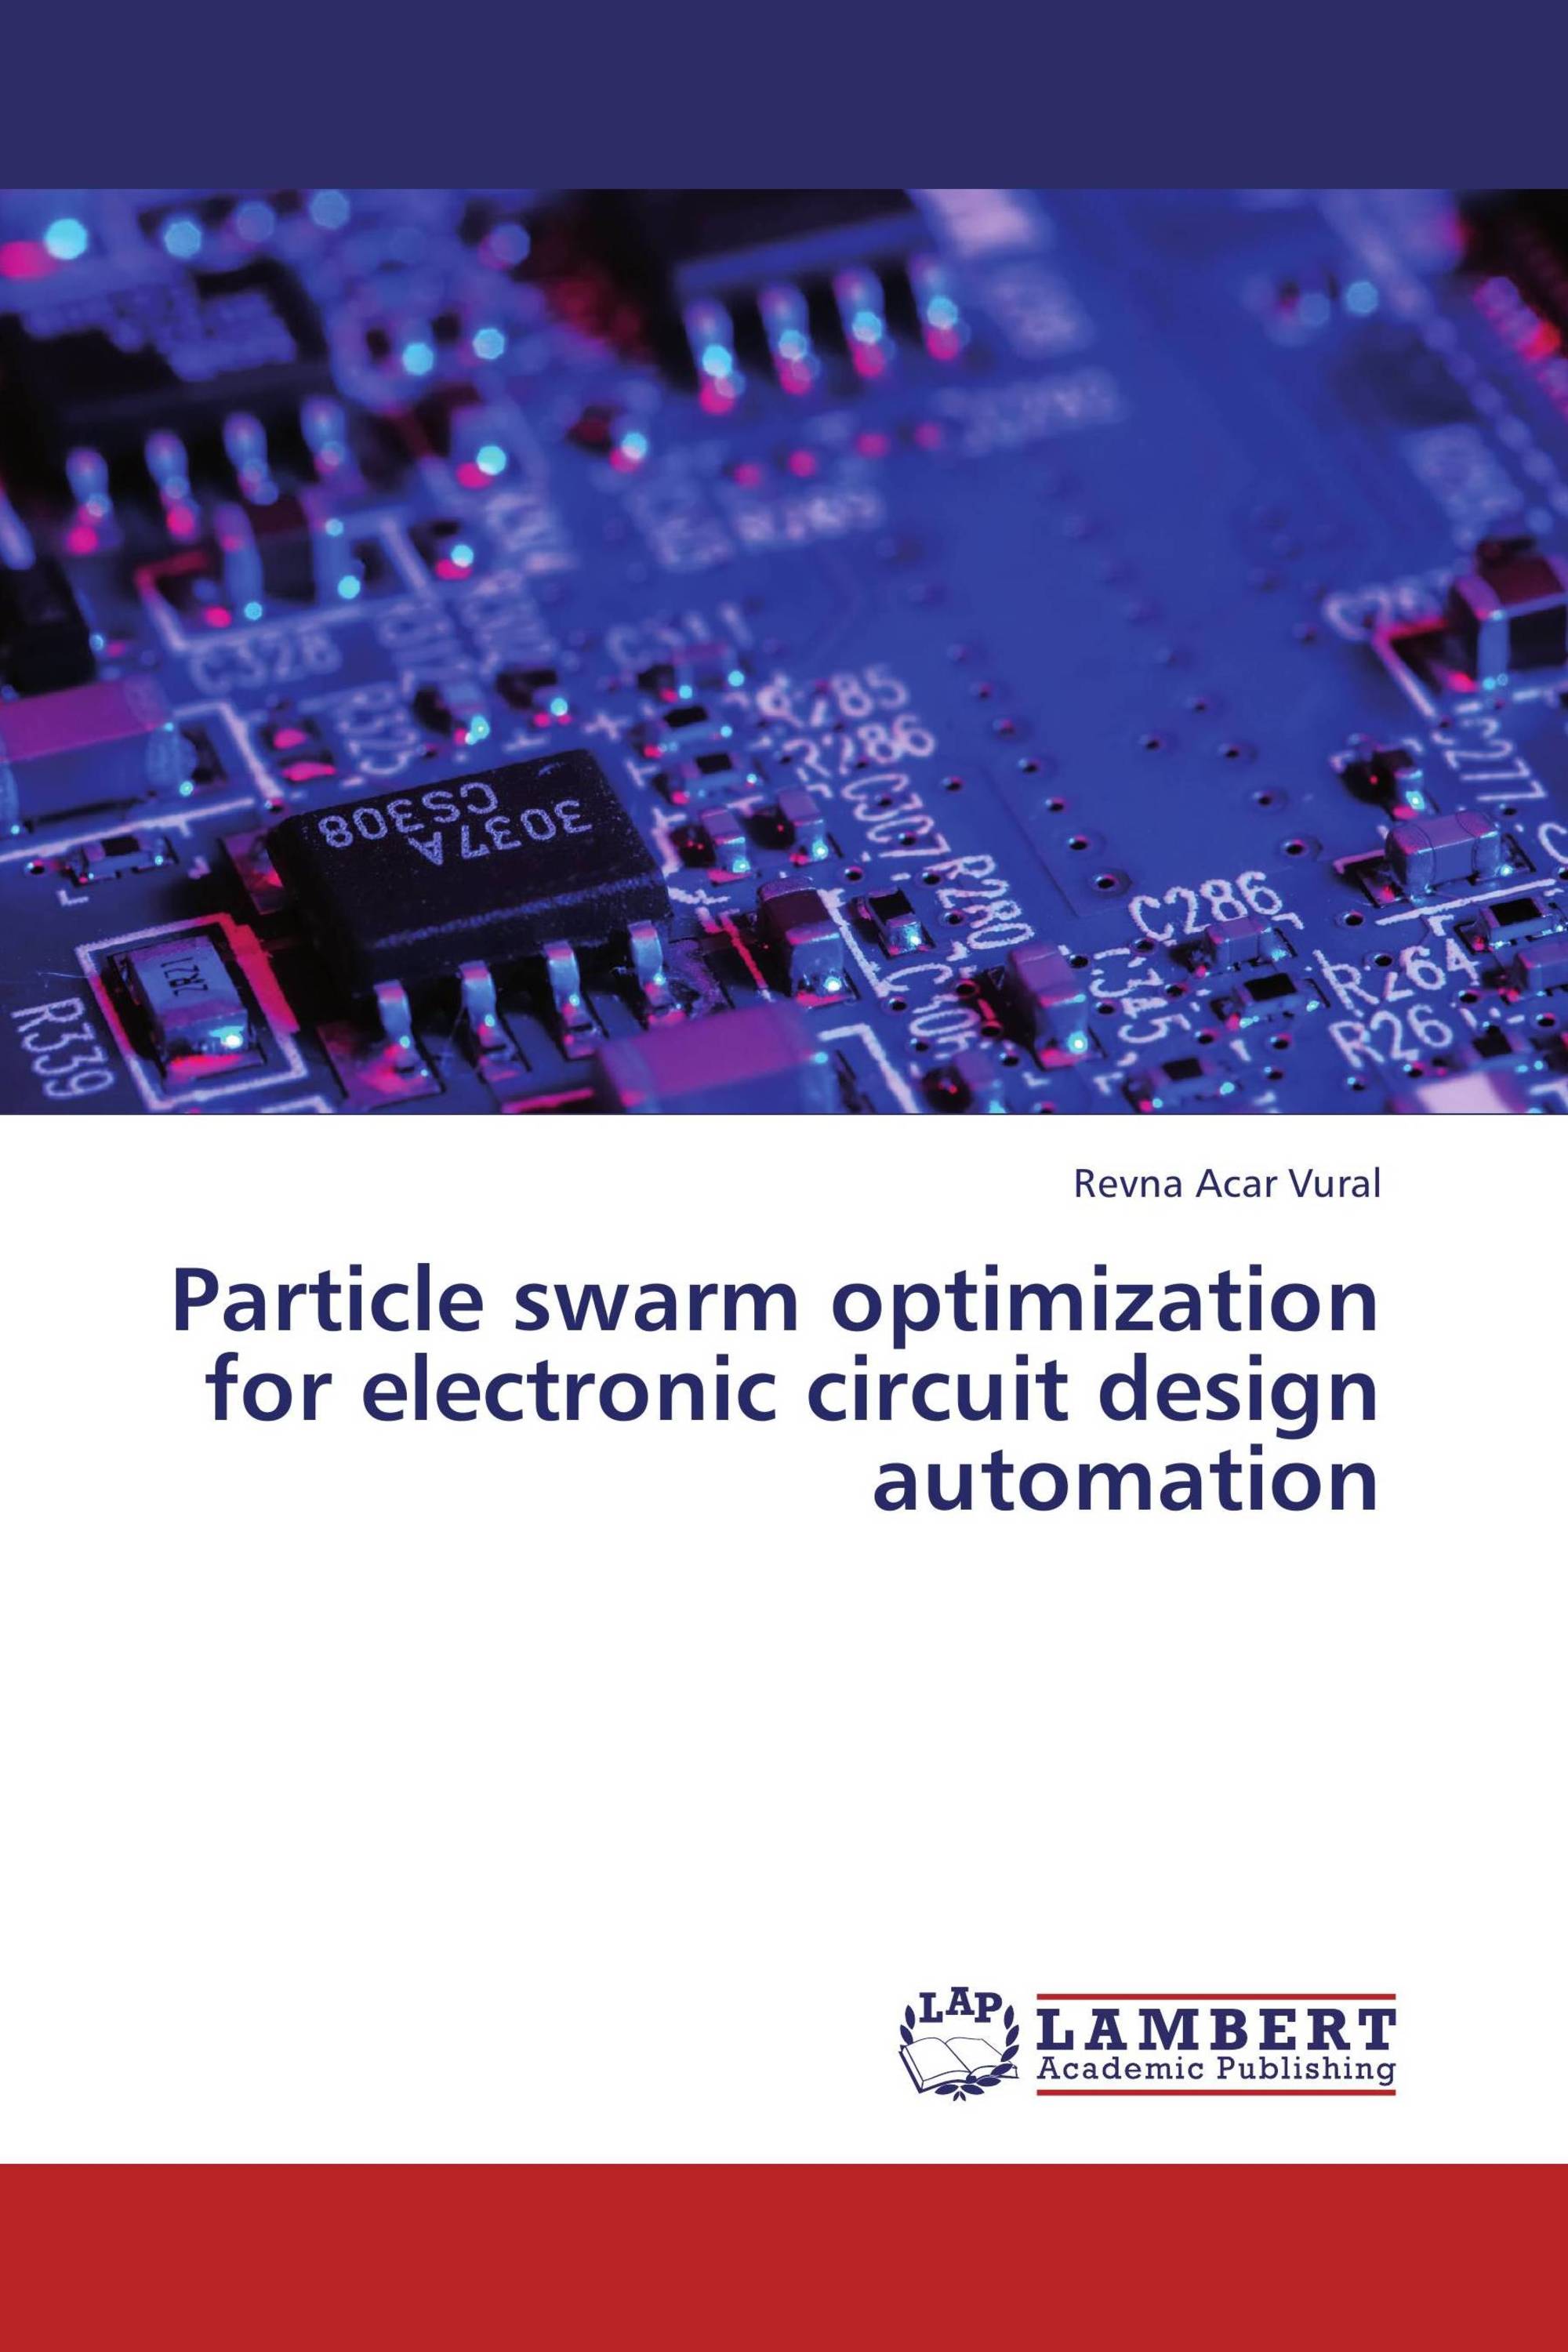 Particle swarm optimization for electronic circuit design automation